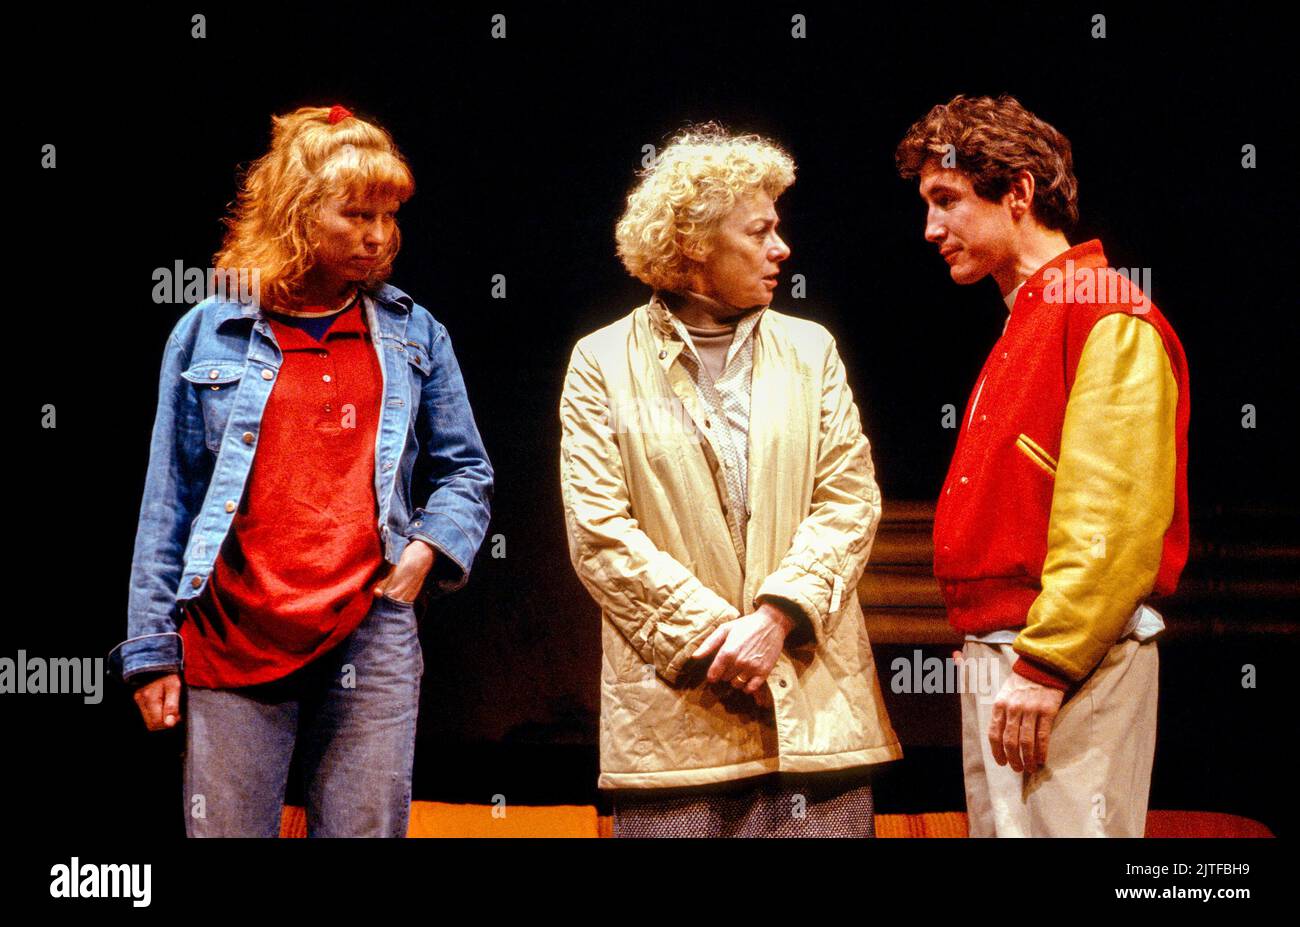 l-r: Rudi Davies (Sally), Geraldine McEwan (Lorraine), Paul McGann (Frankie) in A LIE OF THE MIND by Sam Shepard at the Royal Court Theatre, London SW1  14/10/1987  music: Stephen Warbeck  design: Paul Brown  lighting: Christopher Toulmin  director: Simon Curtis Stock Photo